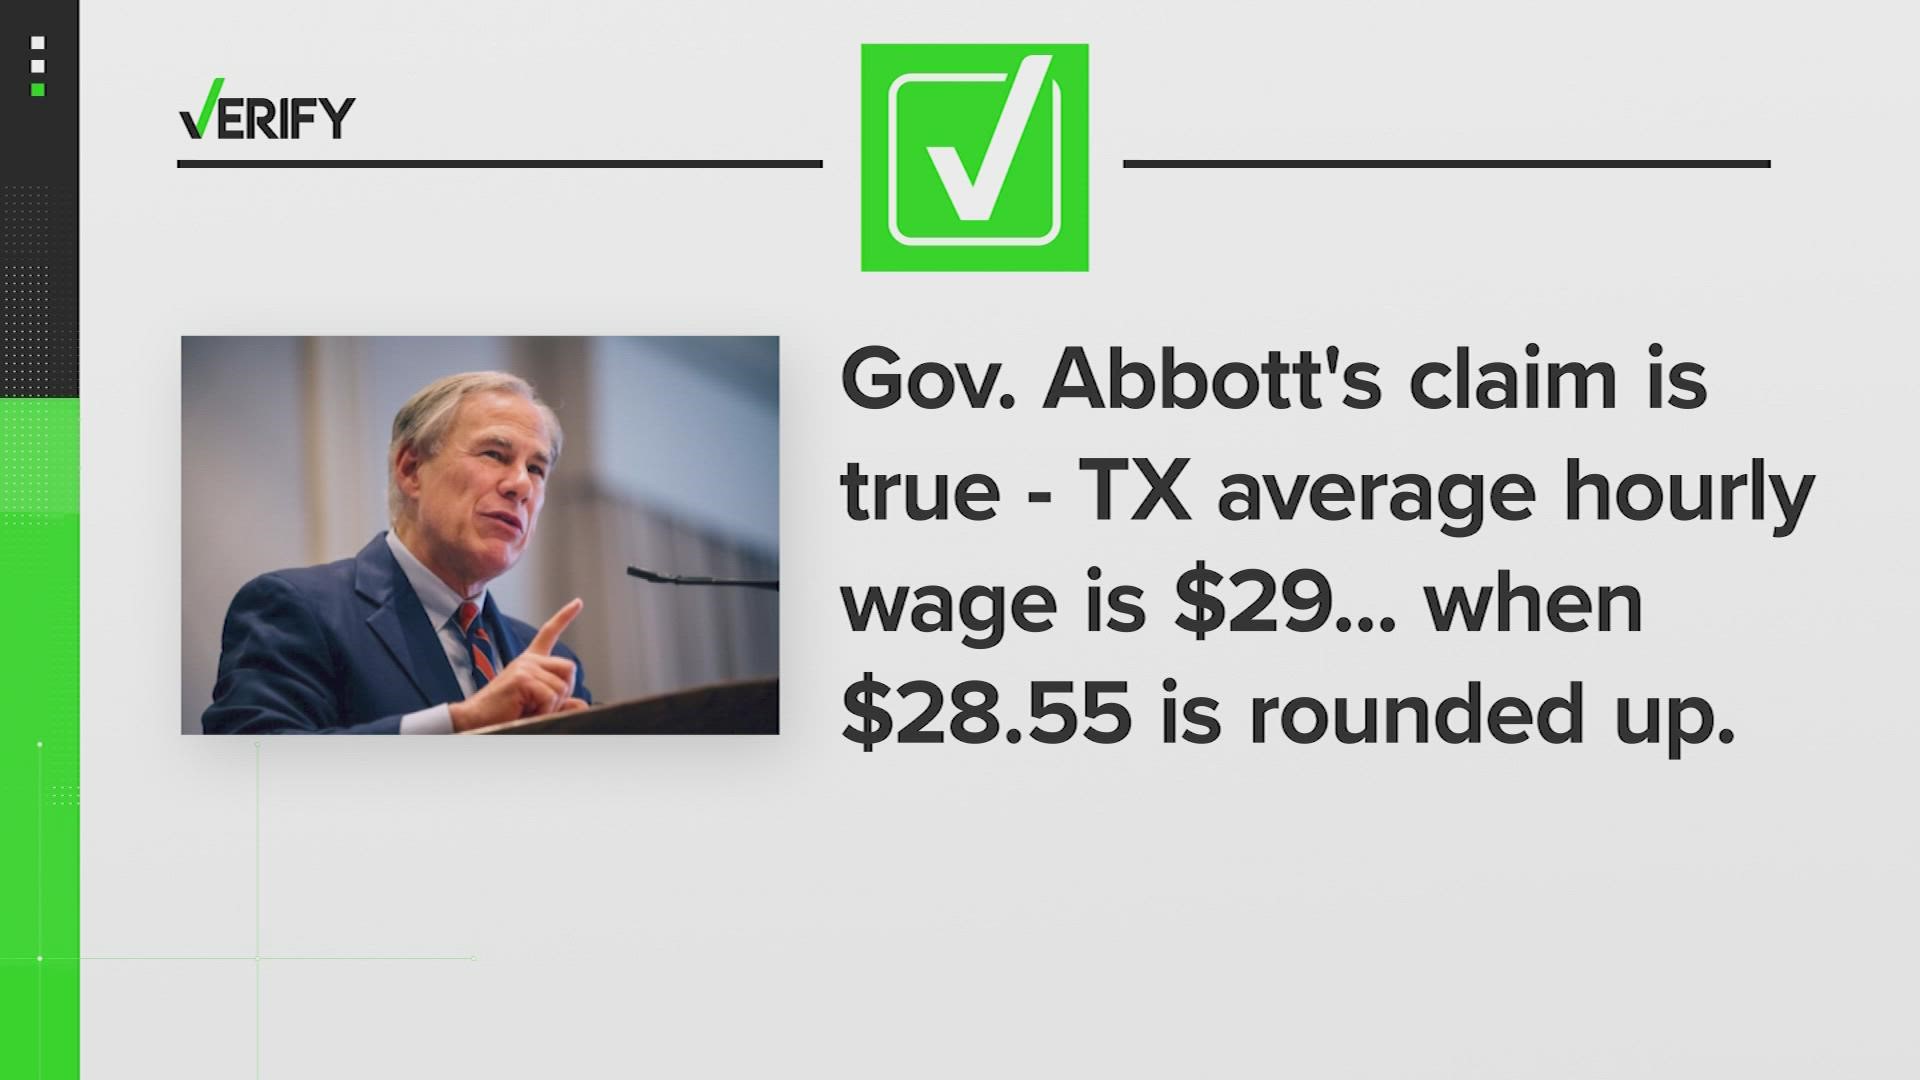 VERIFY What is the average hourly wage in Texas?